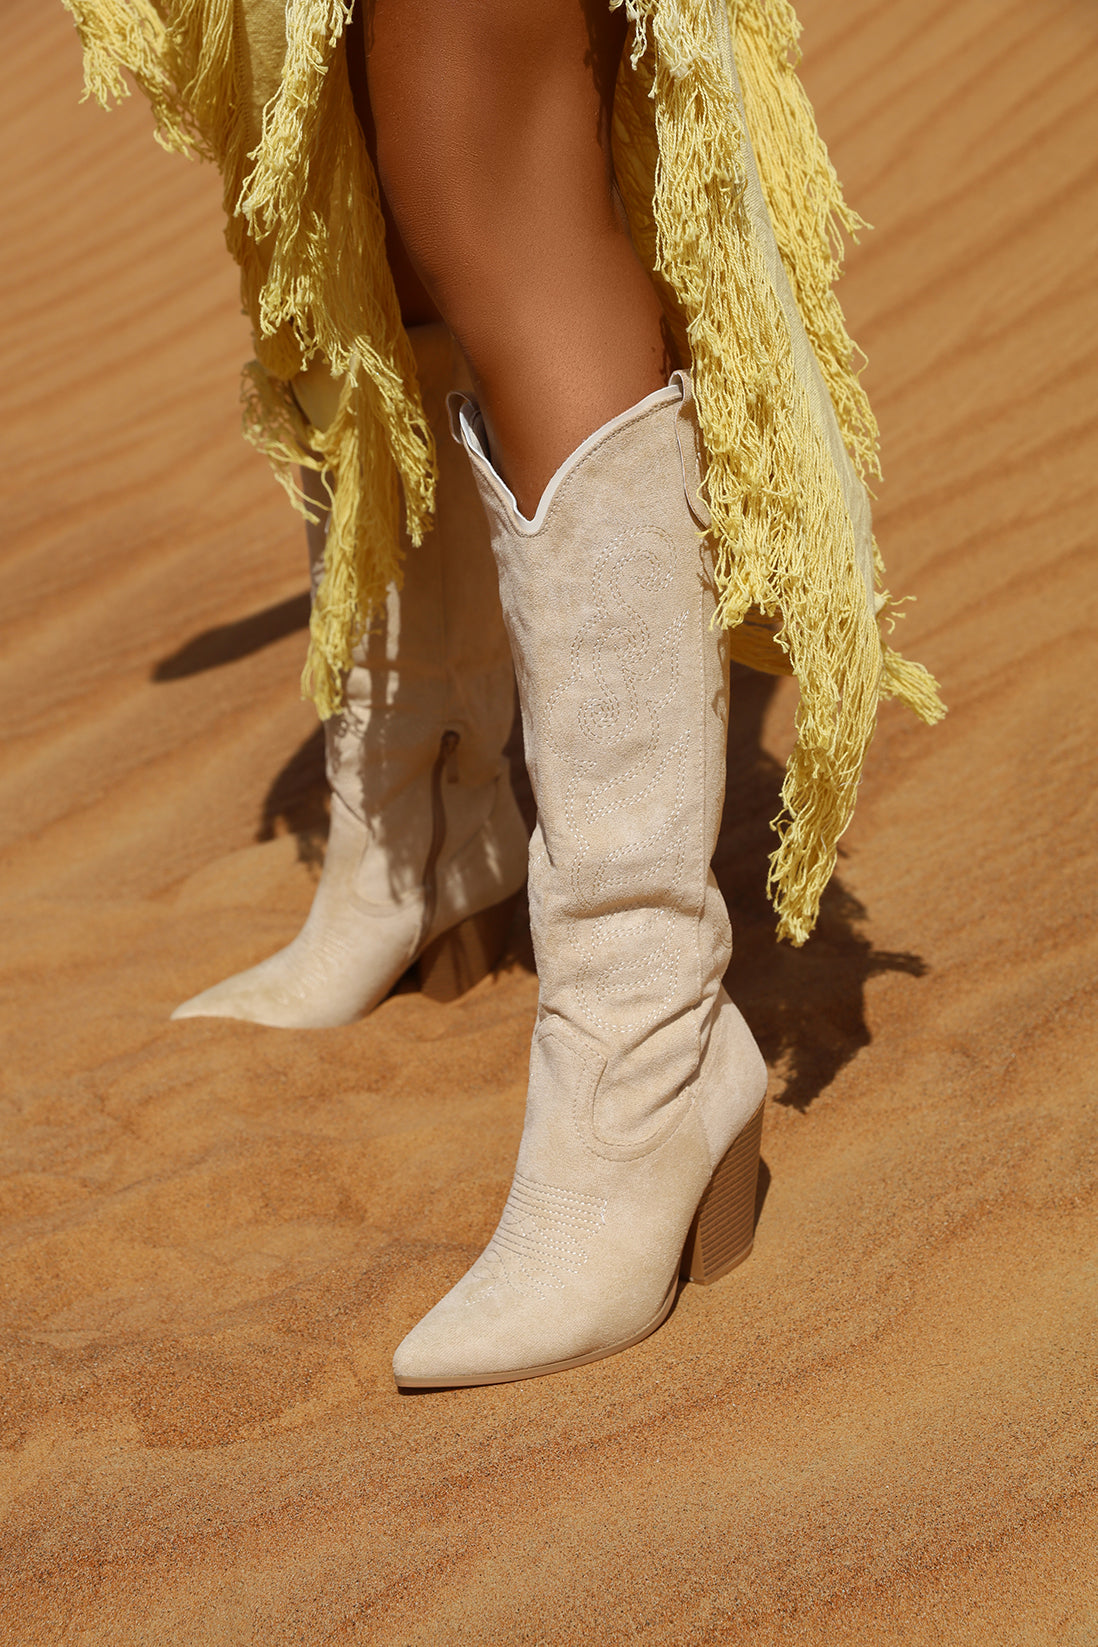 AMBER TURNER 'INTO THE DESERT' FAUX SUEDE CREAM COWBOY BOOTS – Envy Shoes UK